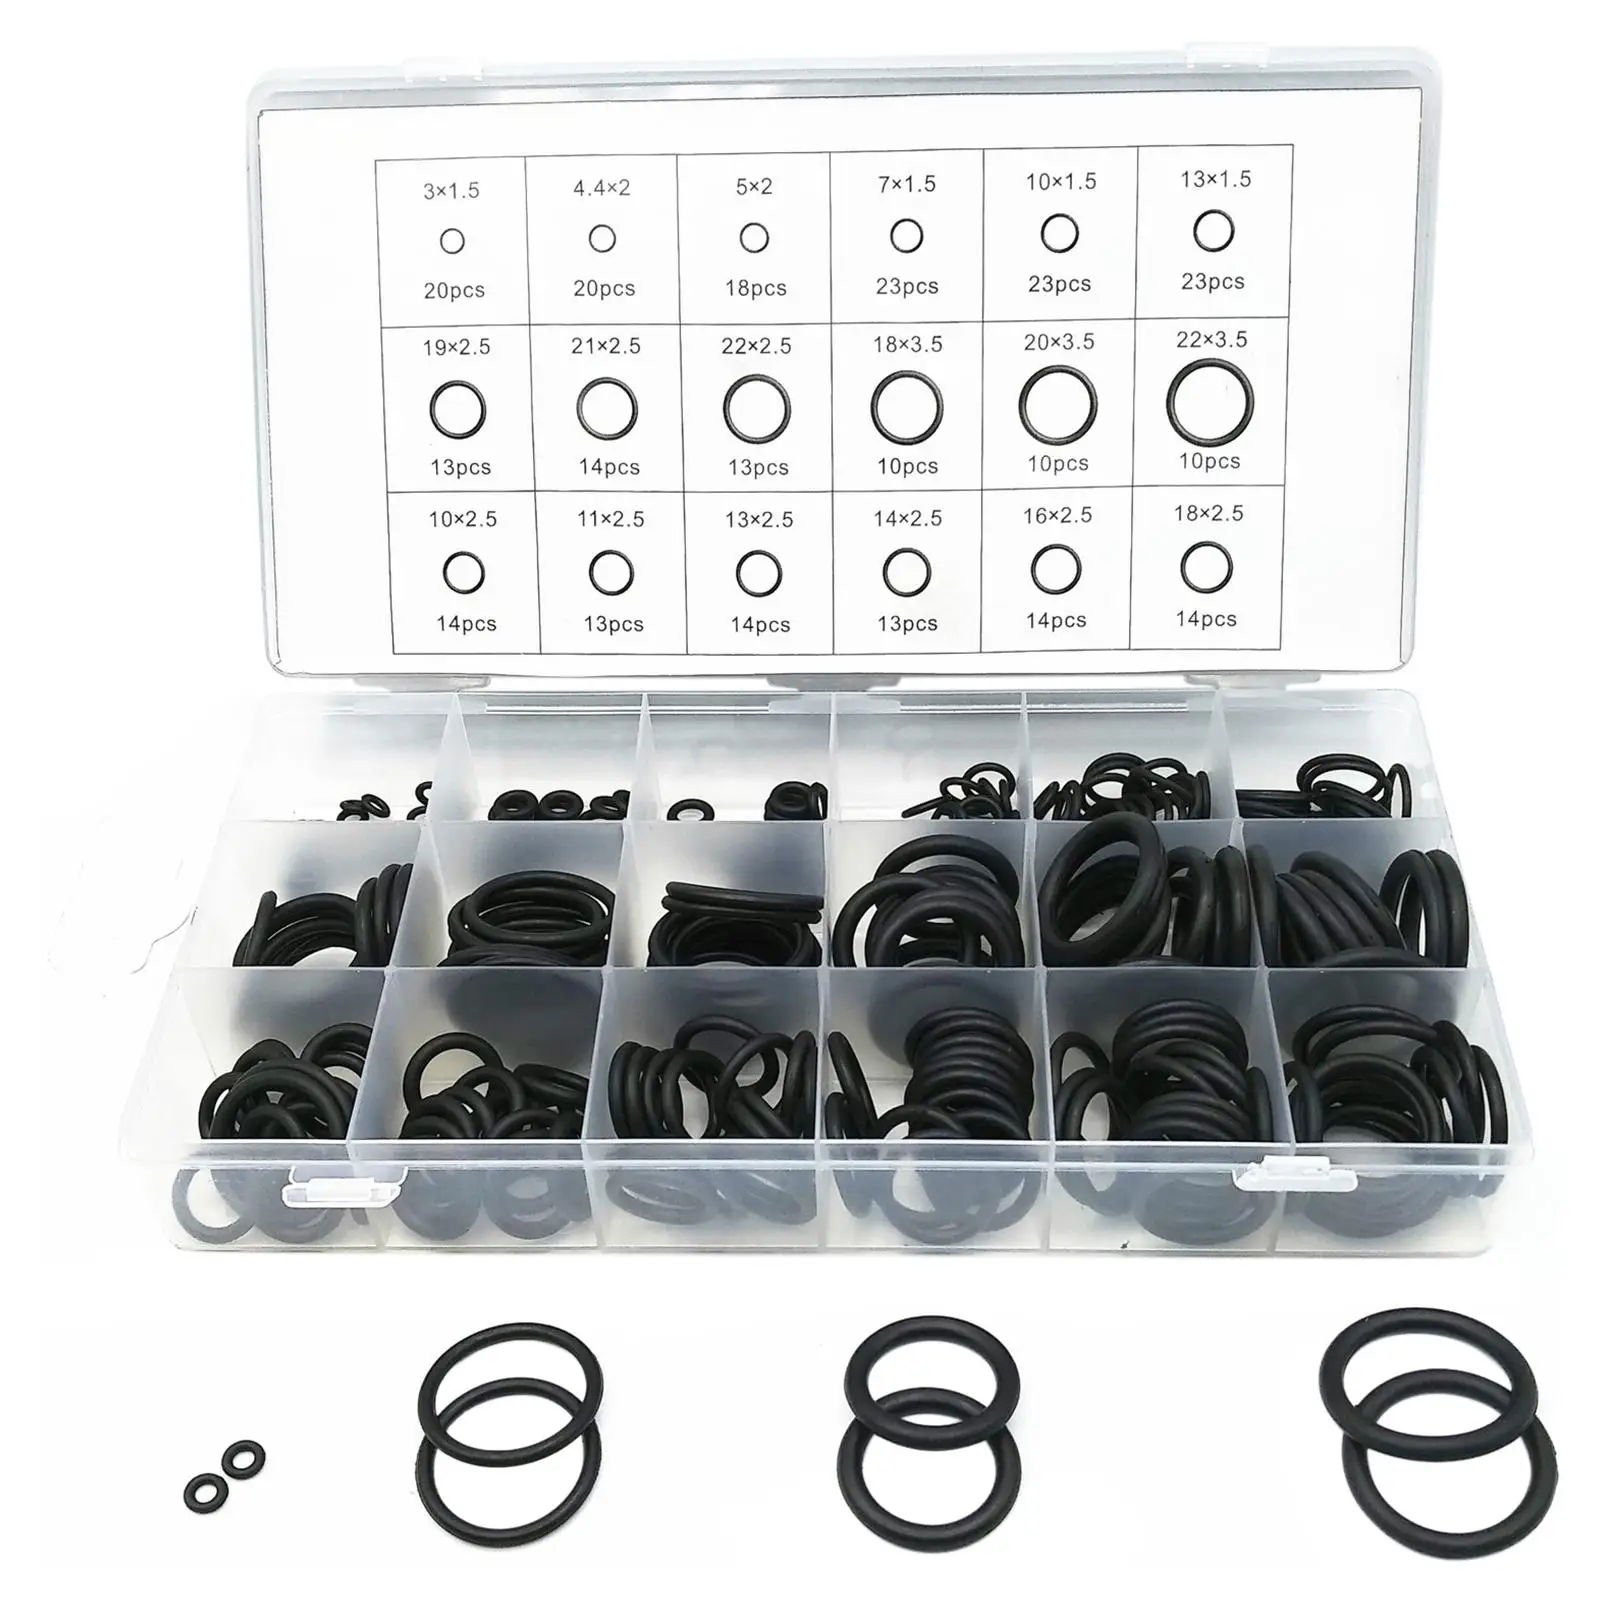 

279Pcs O Ring Assortment Set 18 Sizes for Air Conditioning Compressor